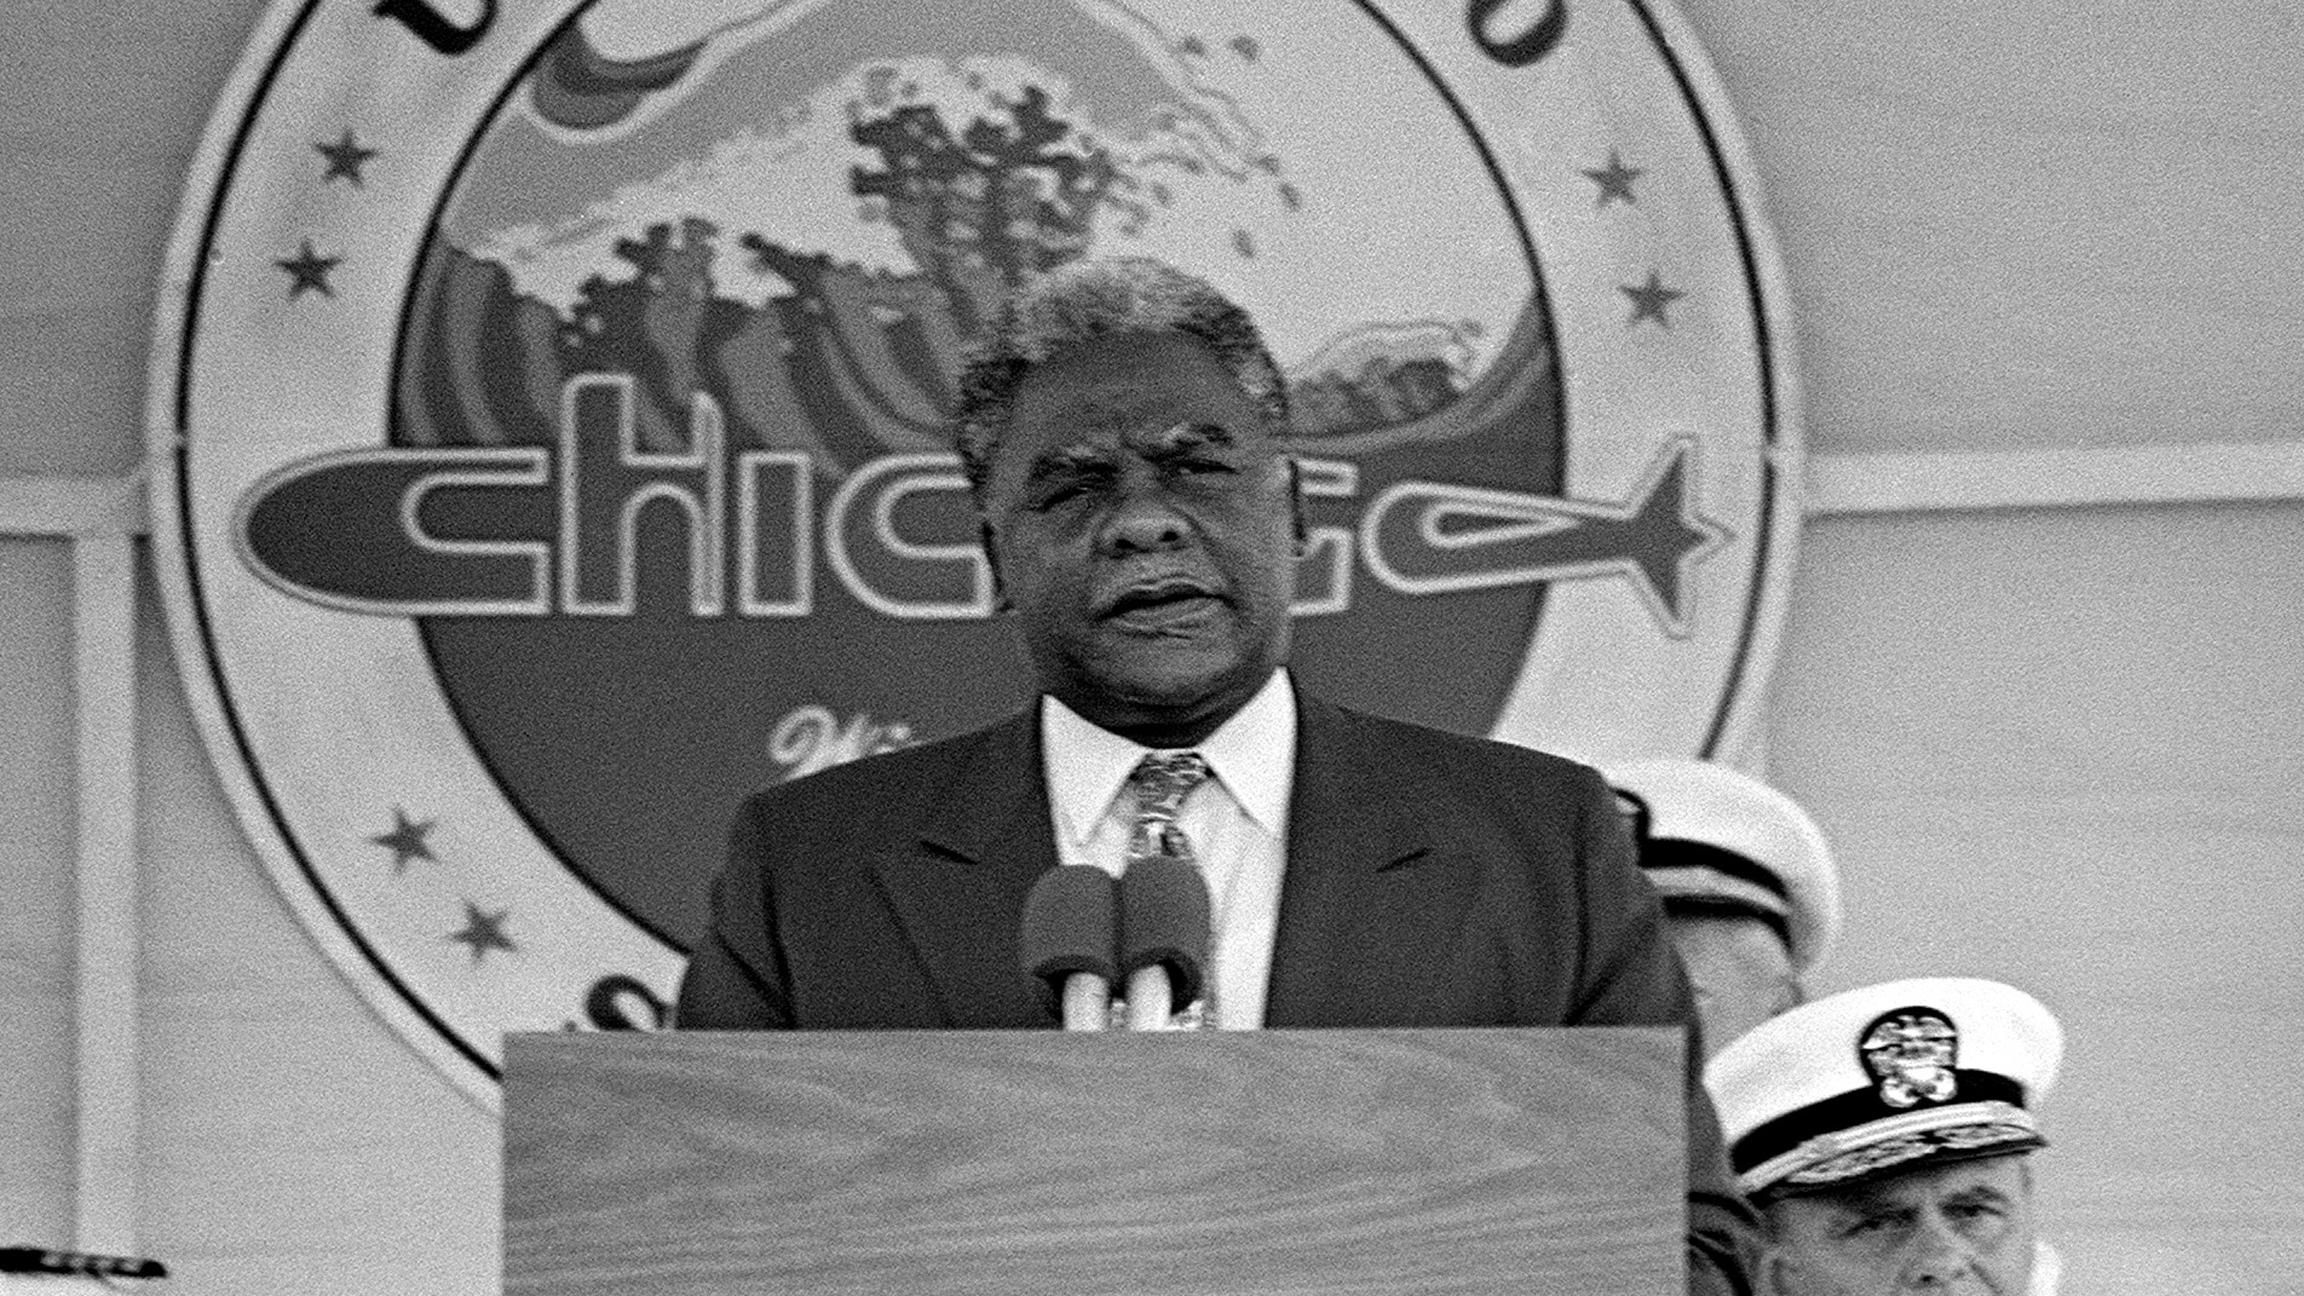 Chicago Mayor Harold Washington speaks during the commissioning of the nuclear-powered attack submarine USS Chicago in September 1986 in Norfolk, Virginia.